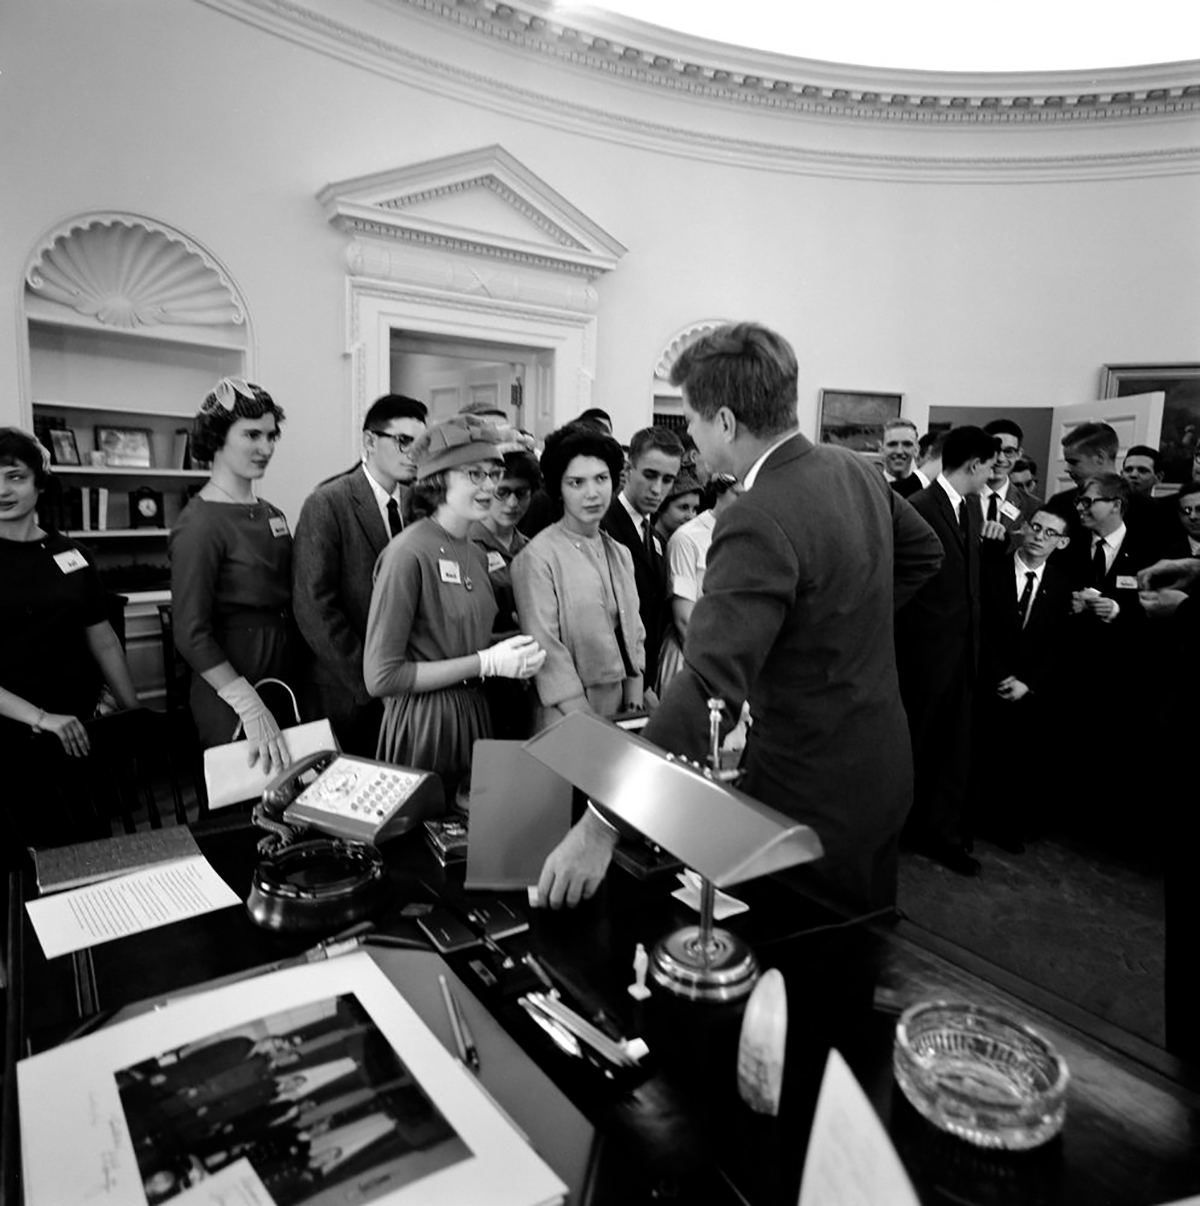 STS finalists visit President Kennedy’s office 